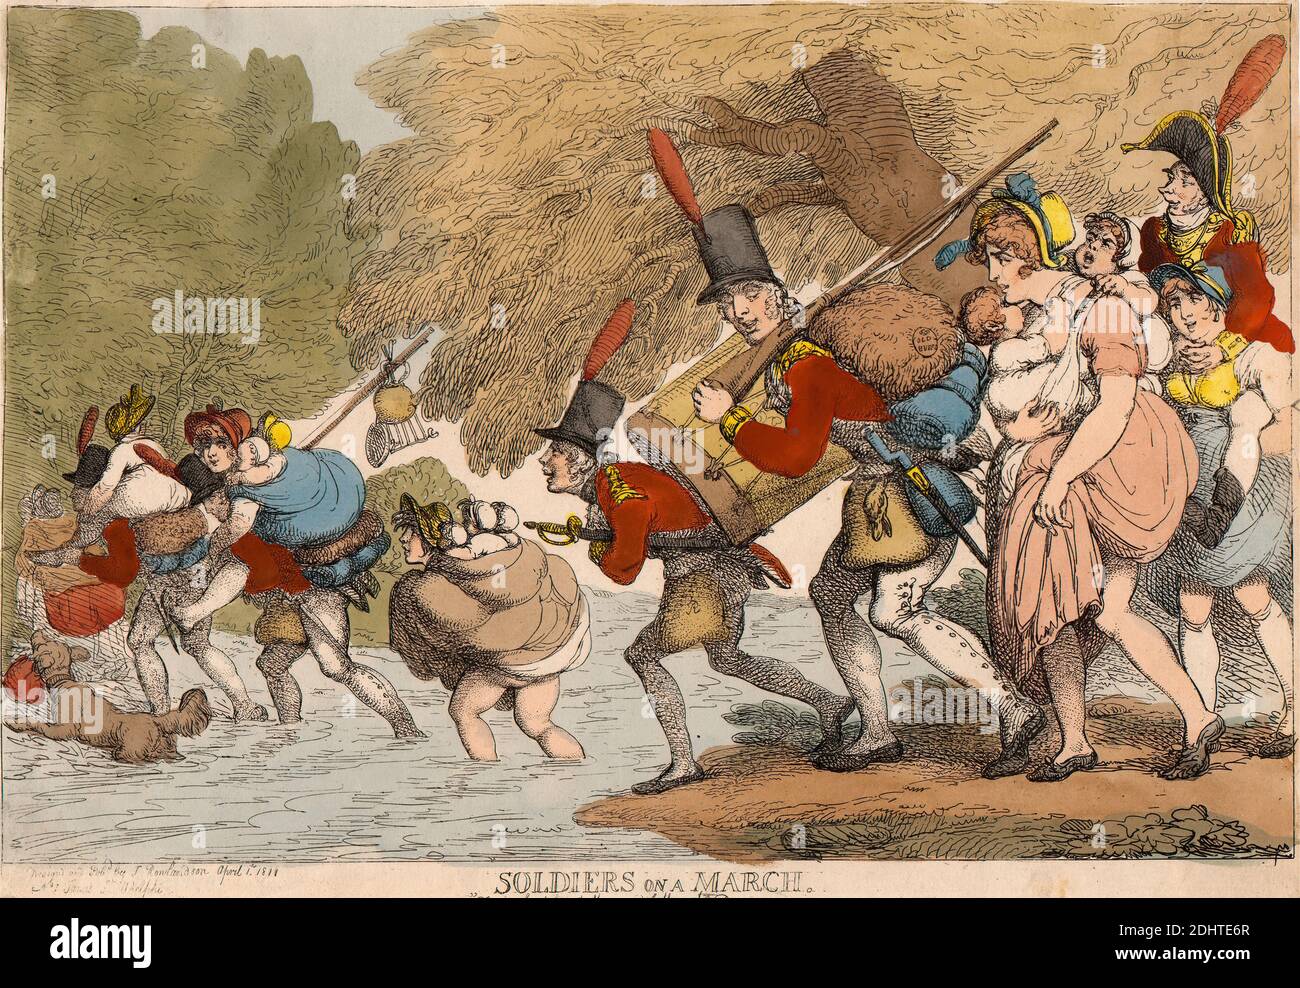 Soldiers on a March: 'To Pack up her tatters and follow the Drum', Thomas Rowlandson, 1756–1827, British, 1811, handkolorierte Radierung, Blatt: 8 3/4 x 9 1/4 Zoll. (22.2 x 23,5 cm Stockfoto